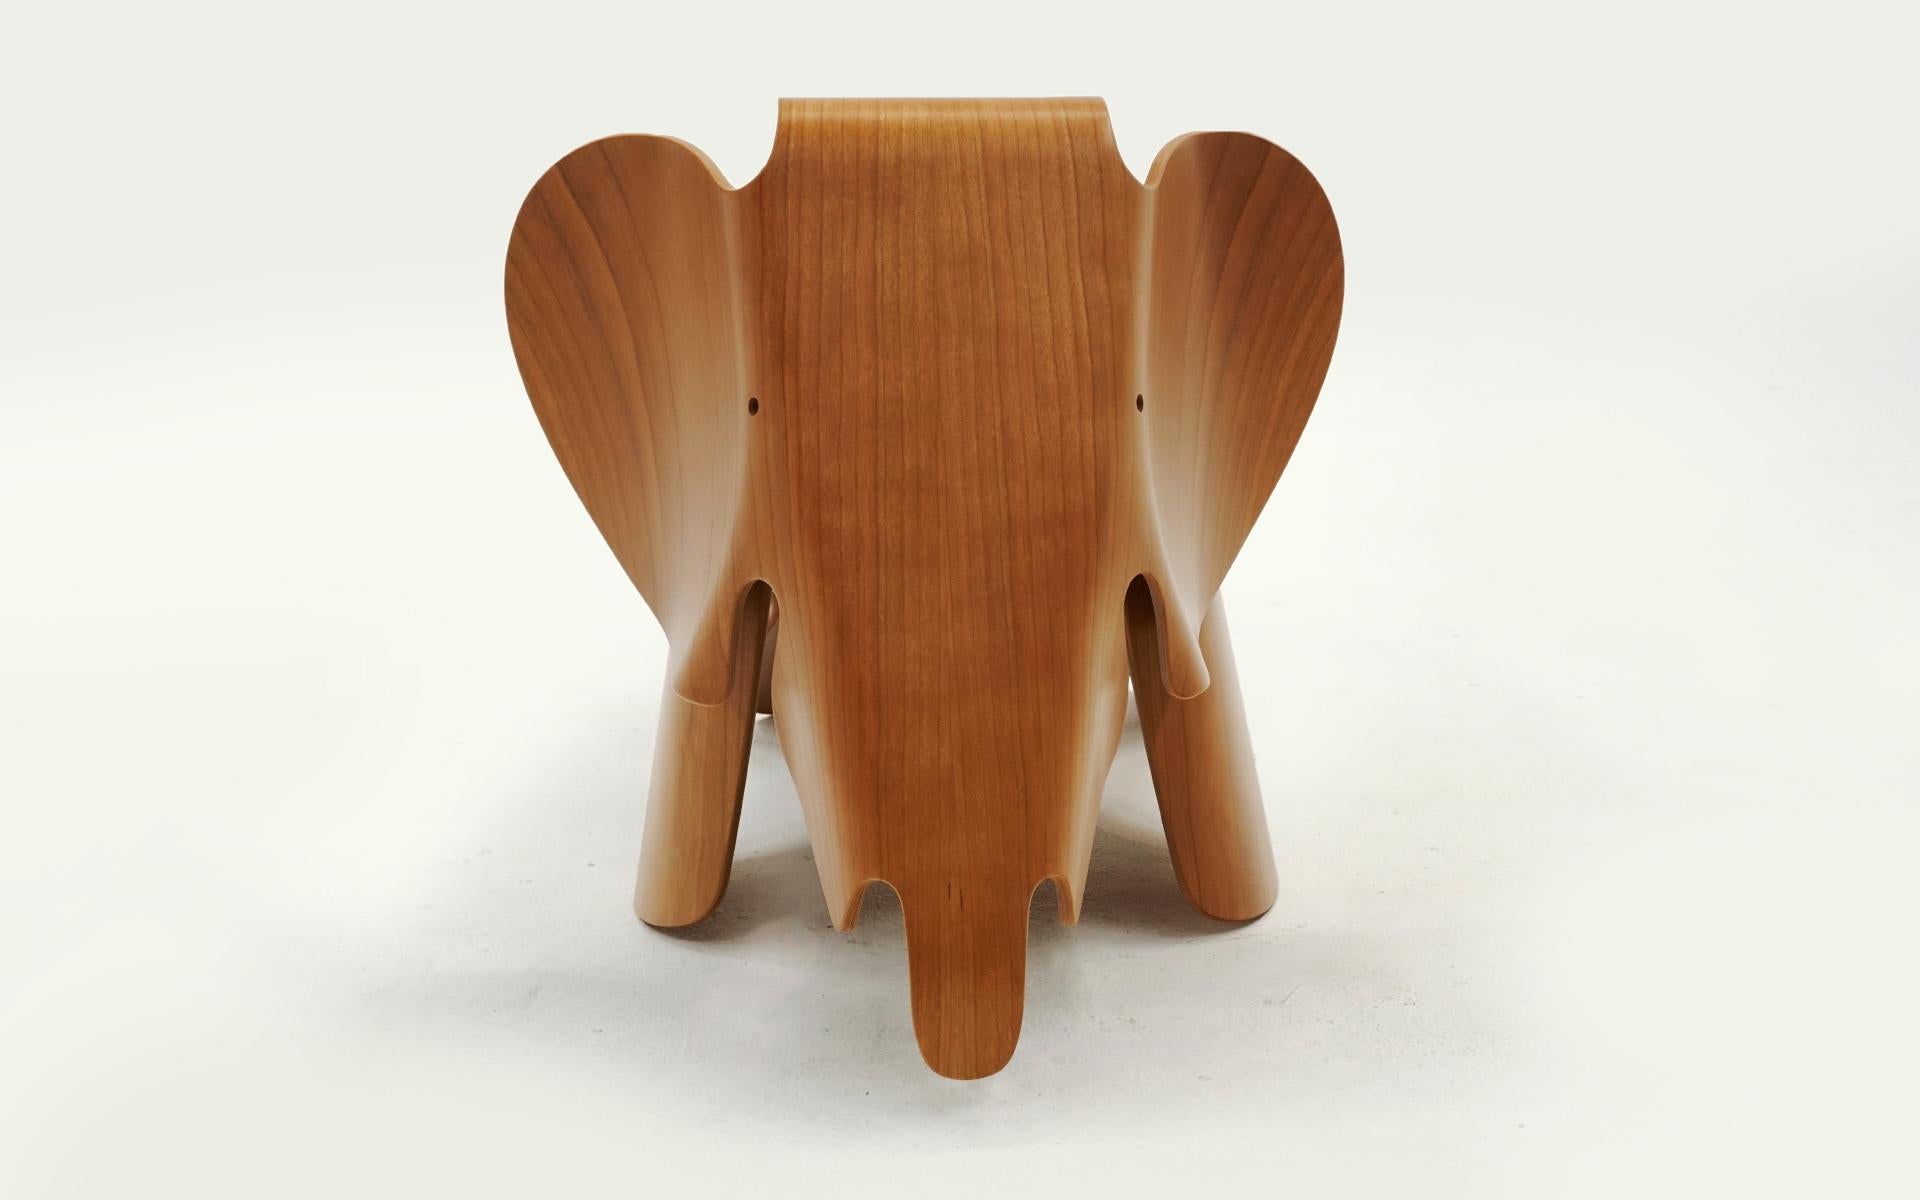 Mid-Century Modern Plywood Elephant by Charles and Ray Eames, New, Only Opened for Photos